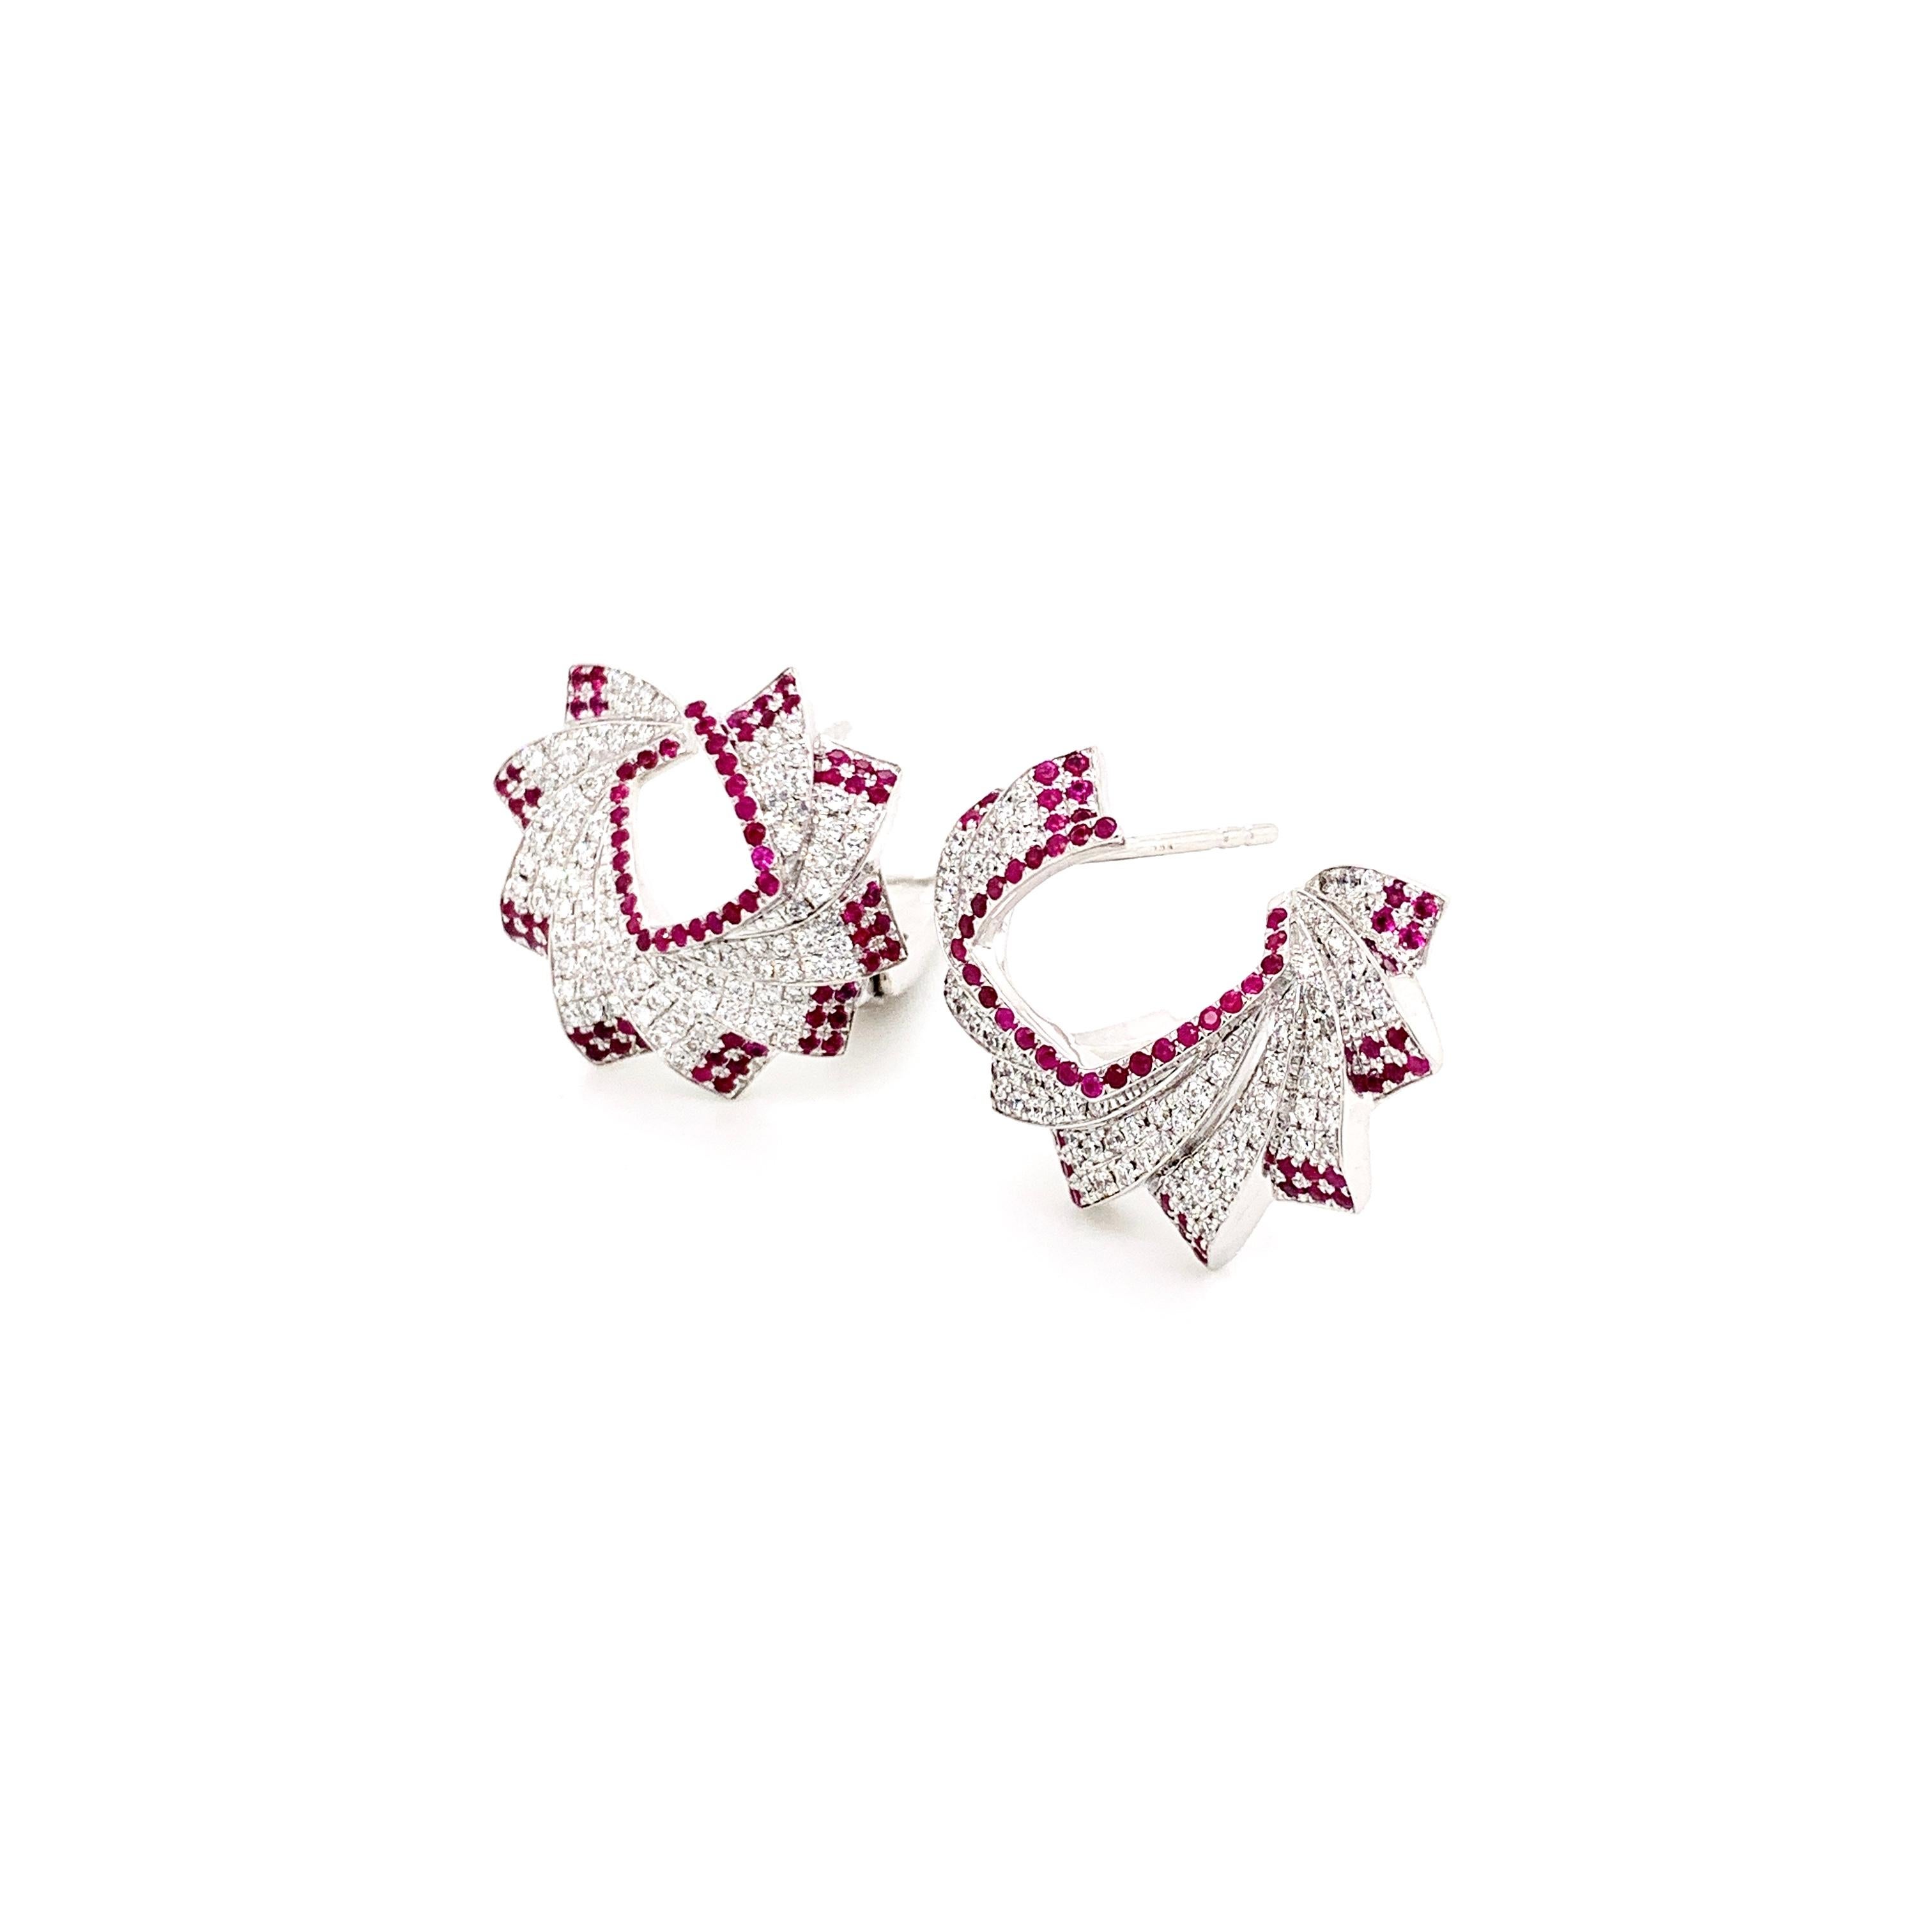 Diamonds and rubies are exquisitely set in these charming Mogra (Jasmine) flower inspired earrings.

The beautiful shade of red of the rubies border the diamond micro pavé of these earrings that sit perfectly on your ears for a magnificent